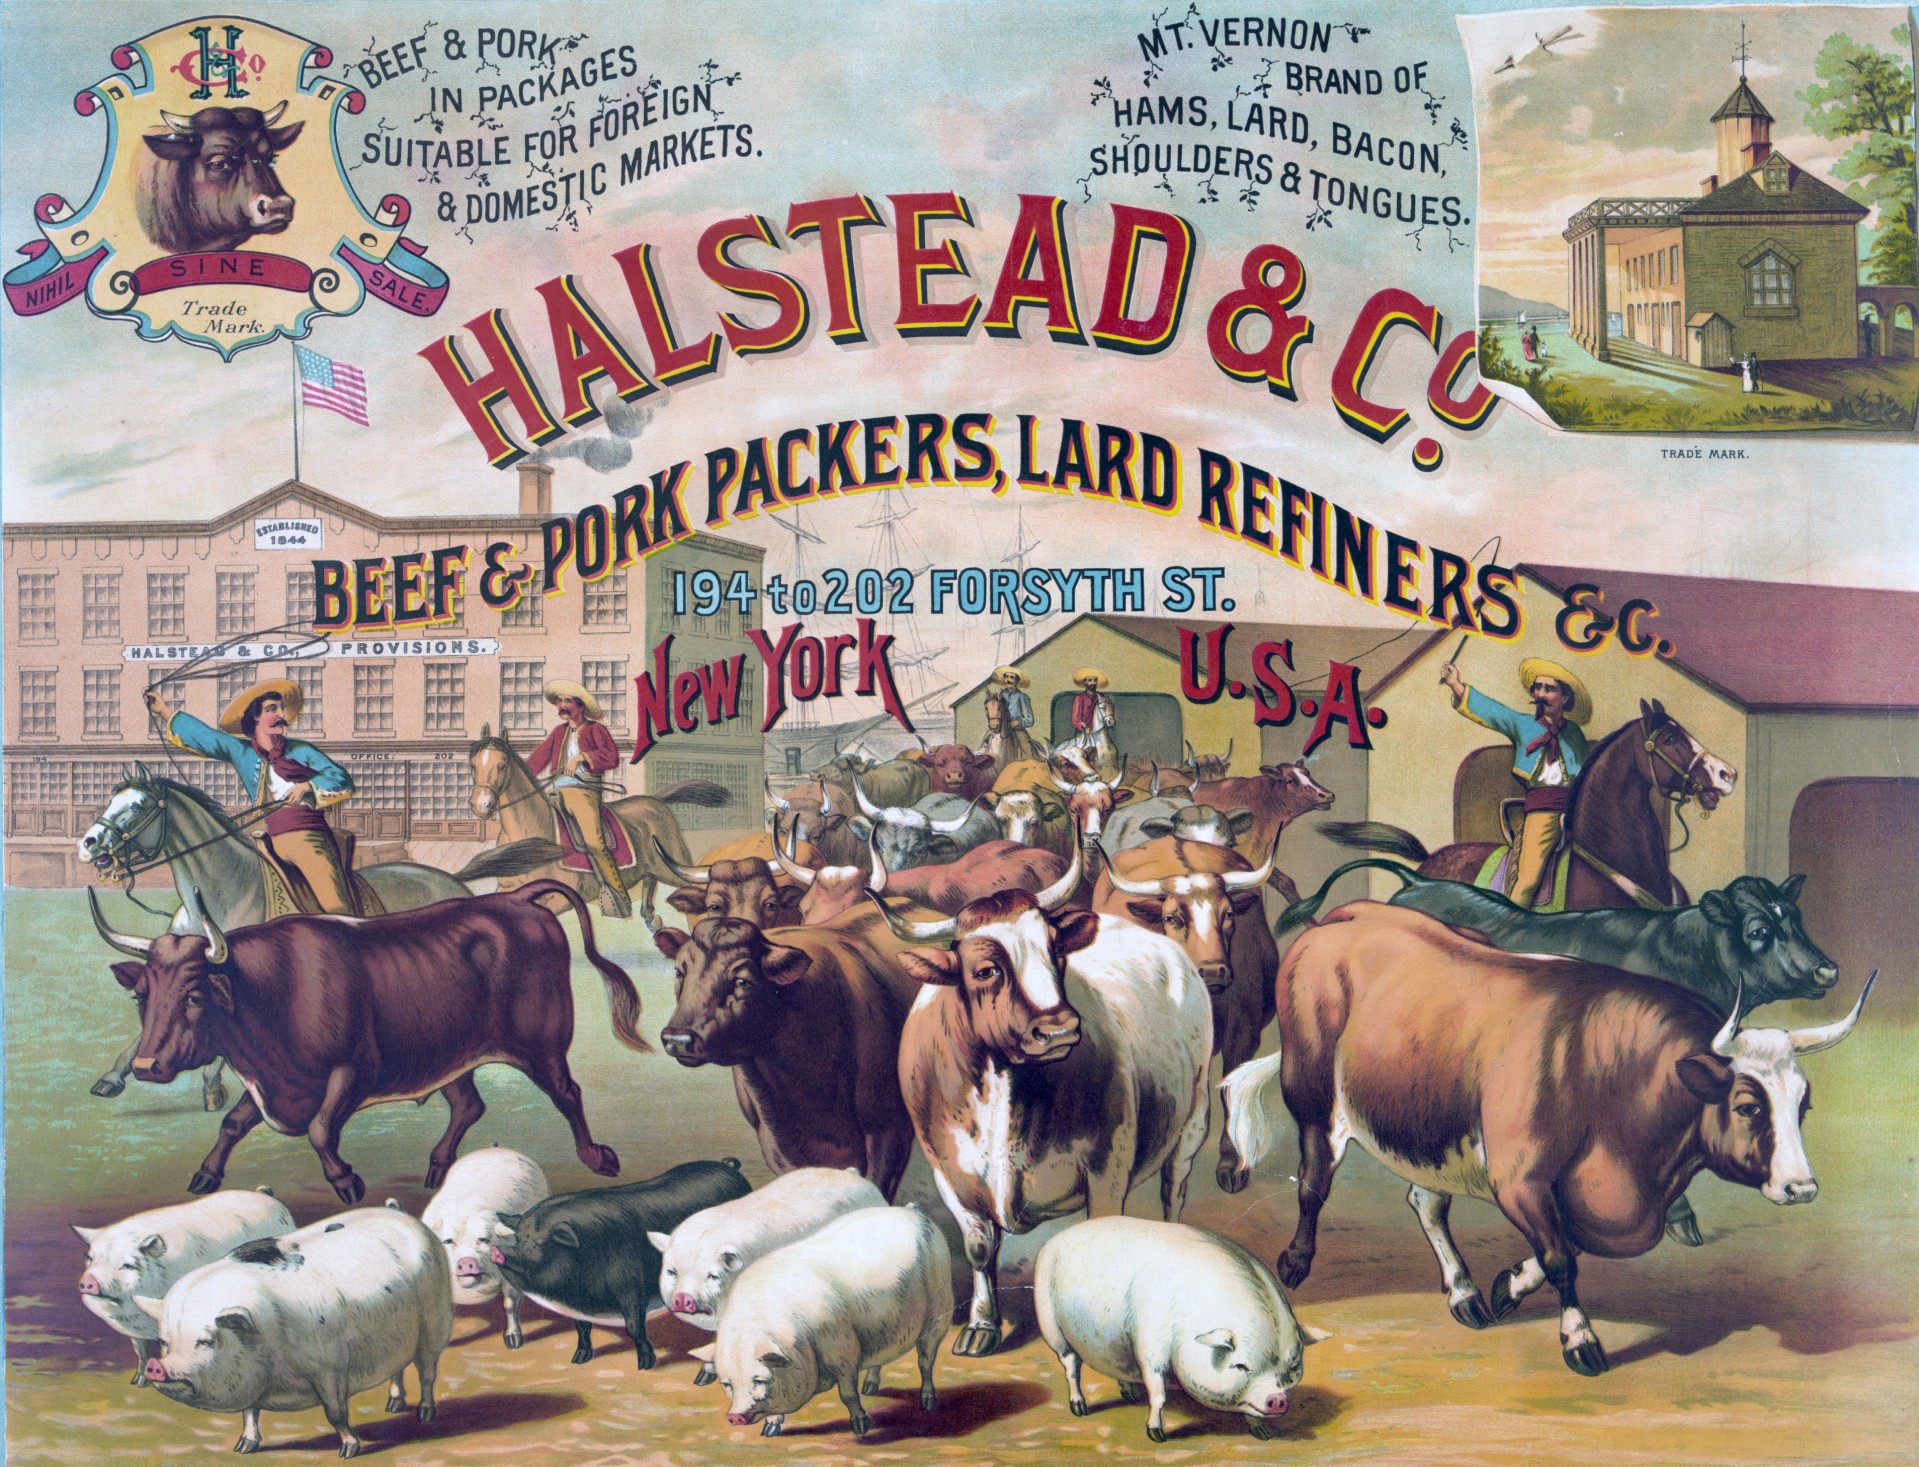 Public domain vintage image of cows, cattle and pigs being herded by men on horseback